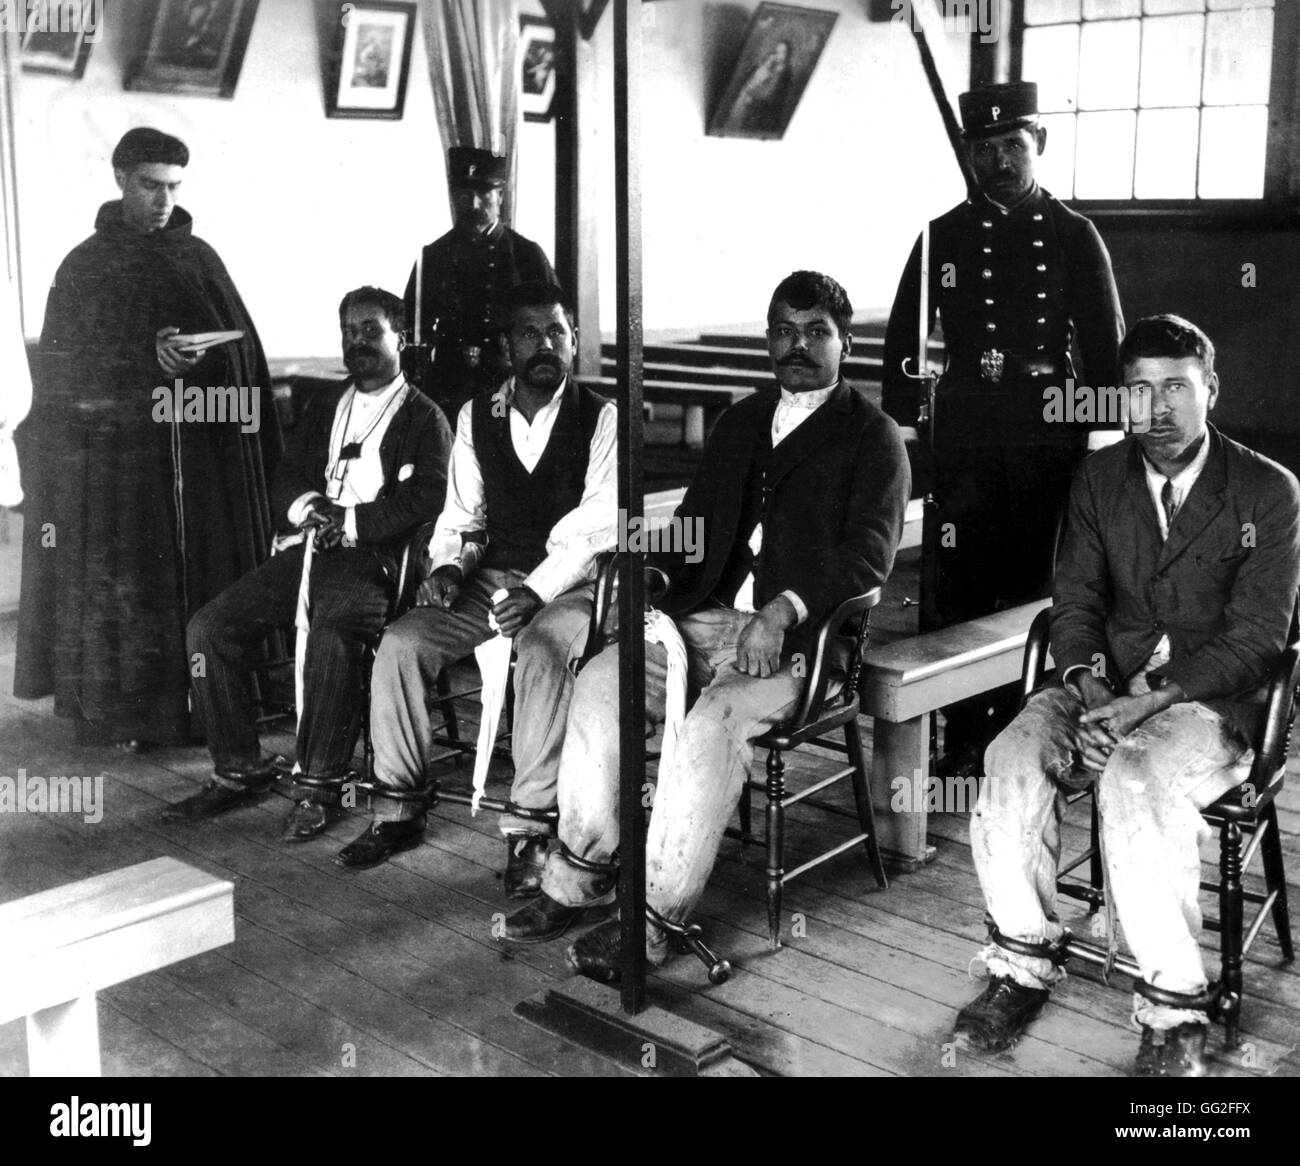 Santiago, men under sentence of death and a priester  c. 1900 Chile Stock Photo